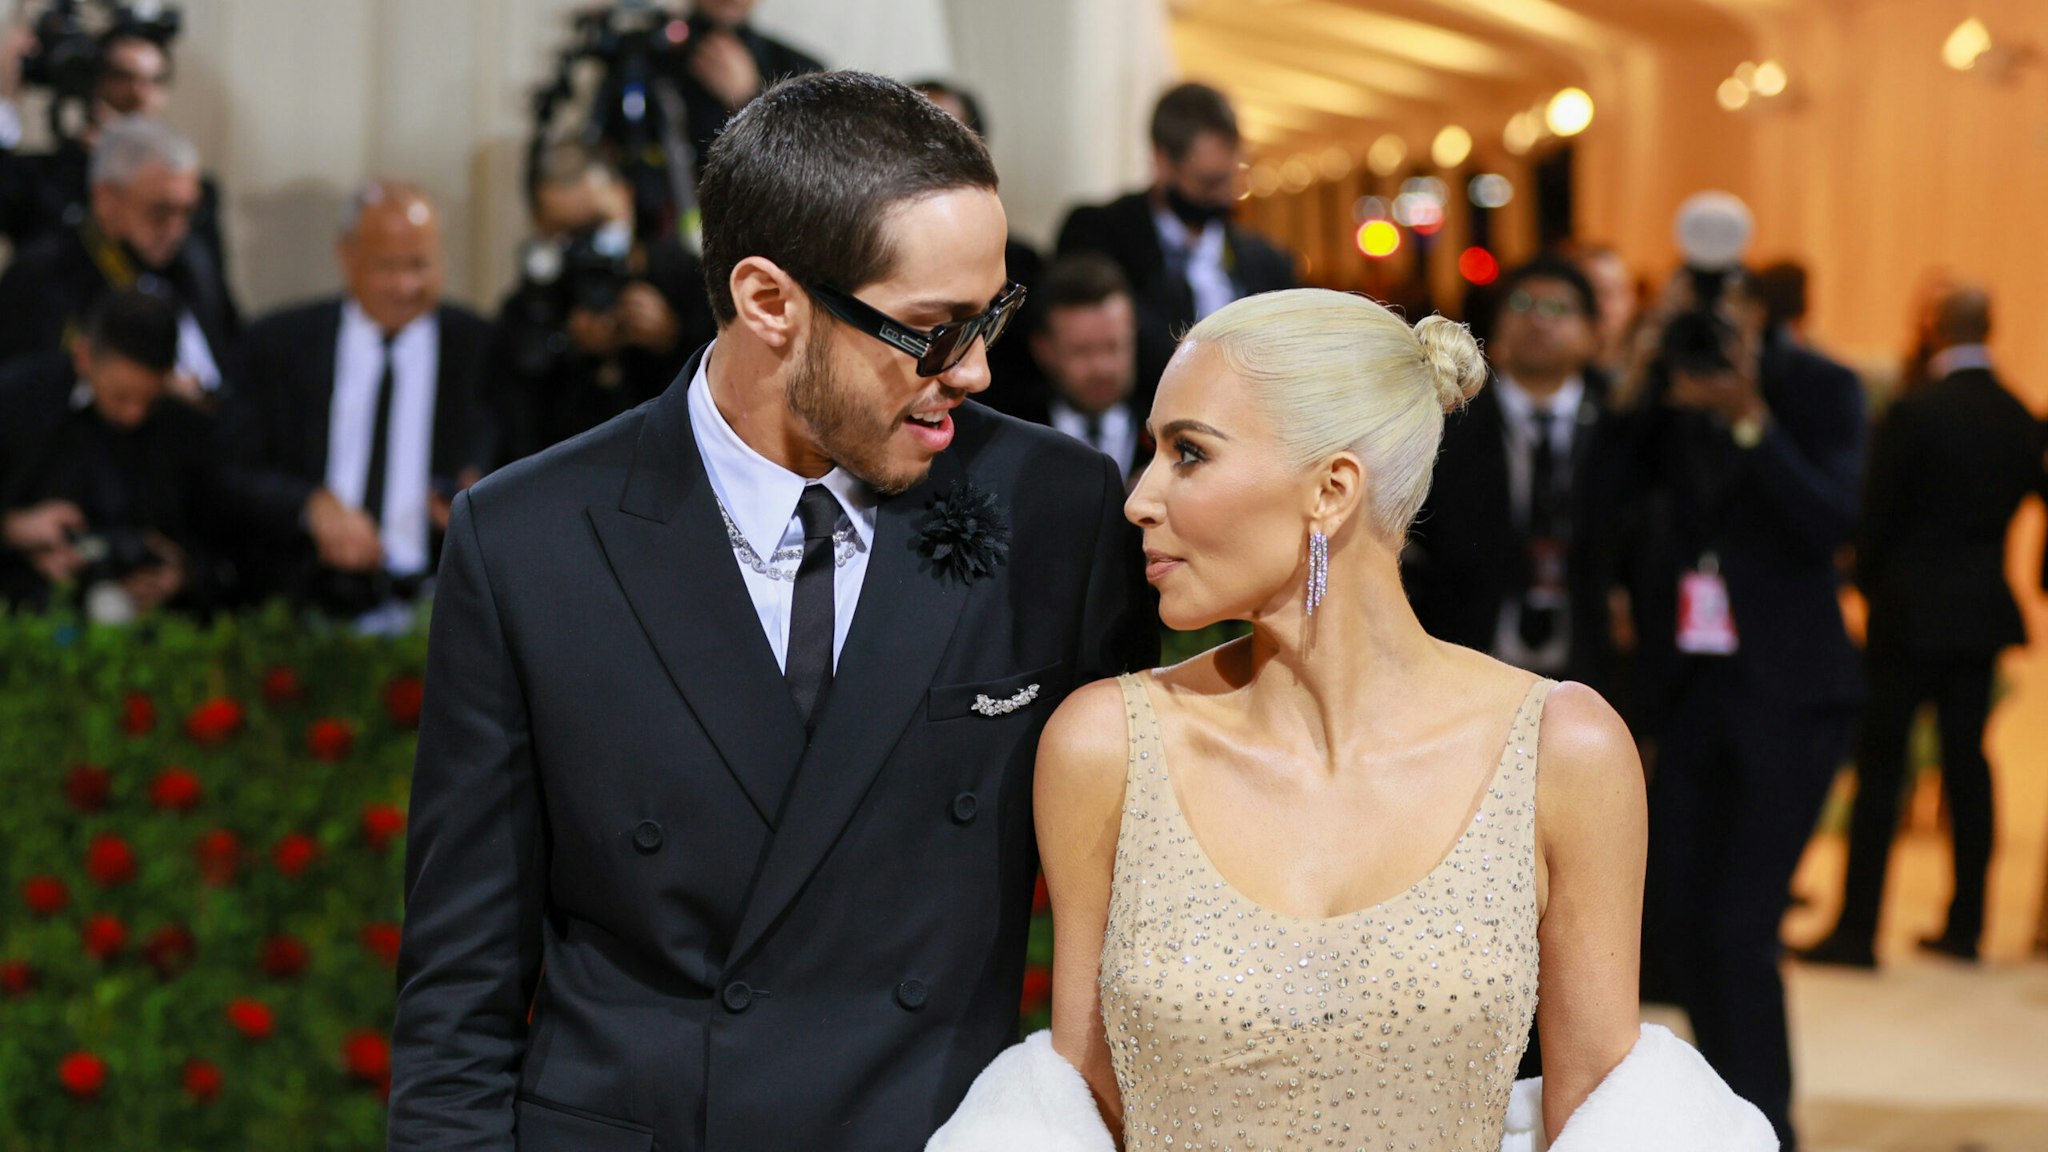 Pete Davidson and Kim Kardashian attend The 2022 Met Gala Celebrating "In America: An Anthology of Fashion" at The Metropolitan Museum of Art on May 02, 2022 in New York City.